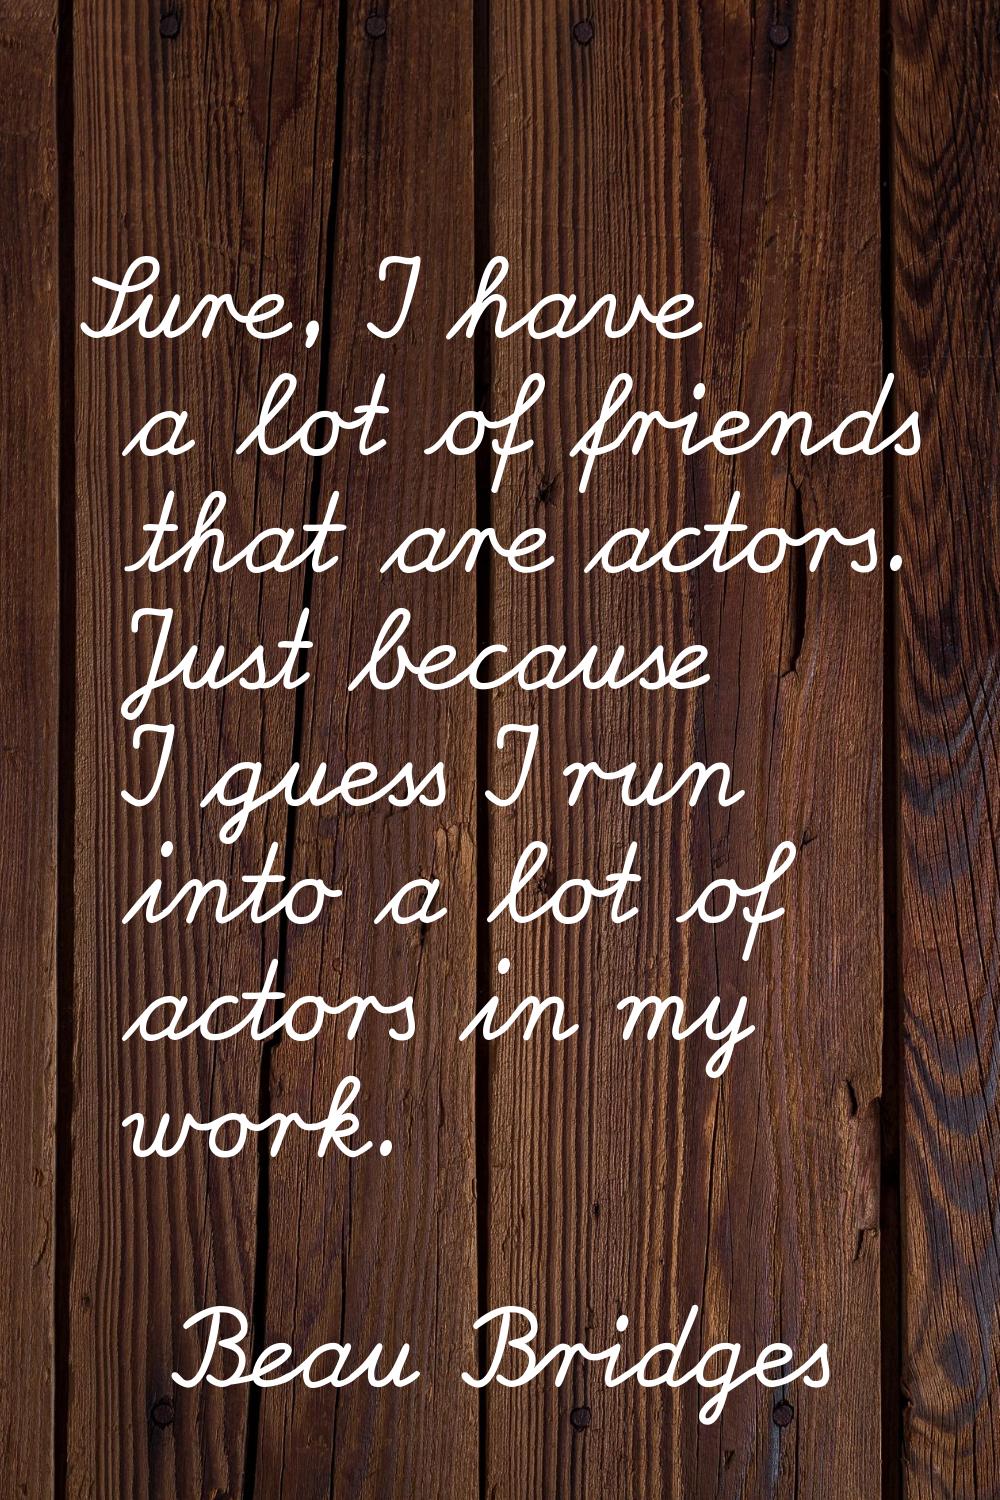 Sure, I have a lot of friends that are actors. Just because I guess I run into a lot of actors in m